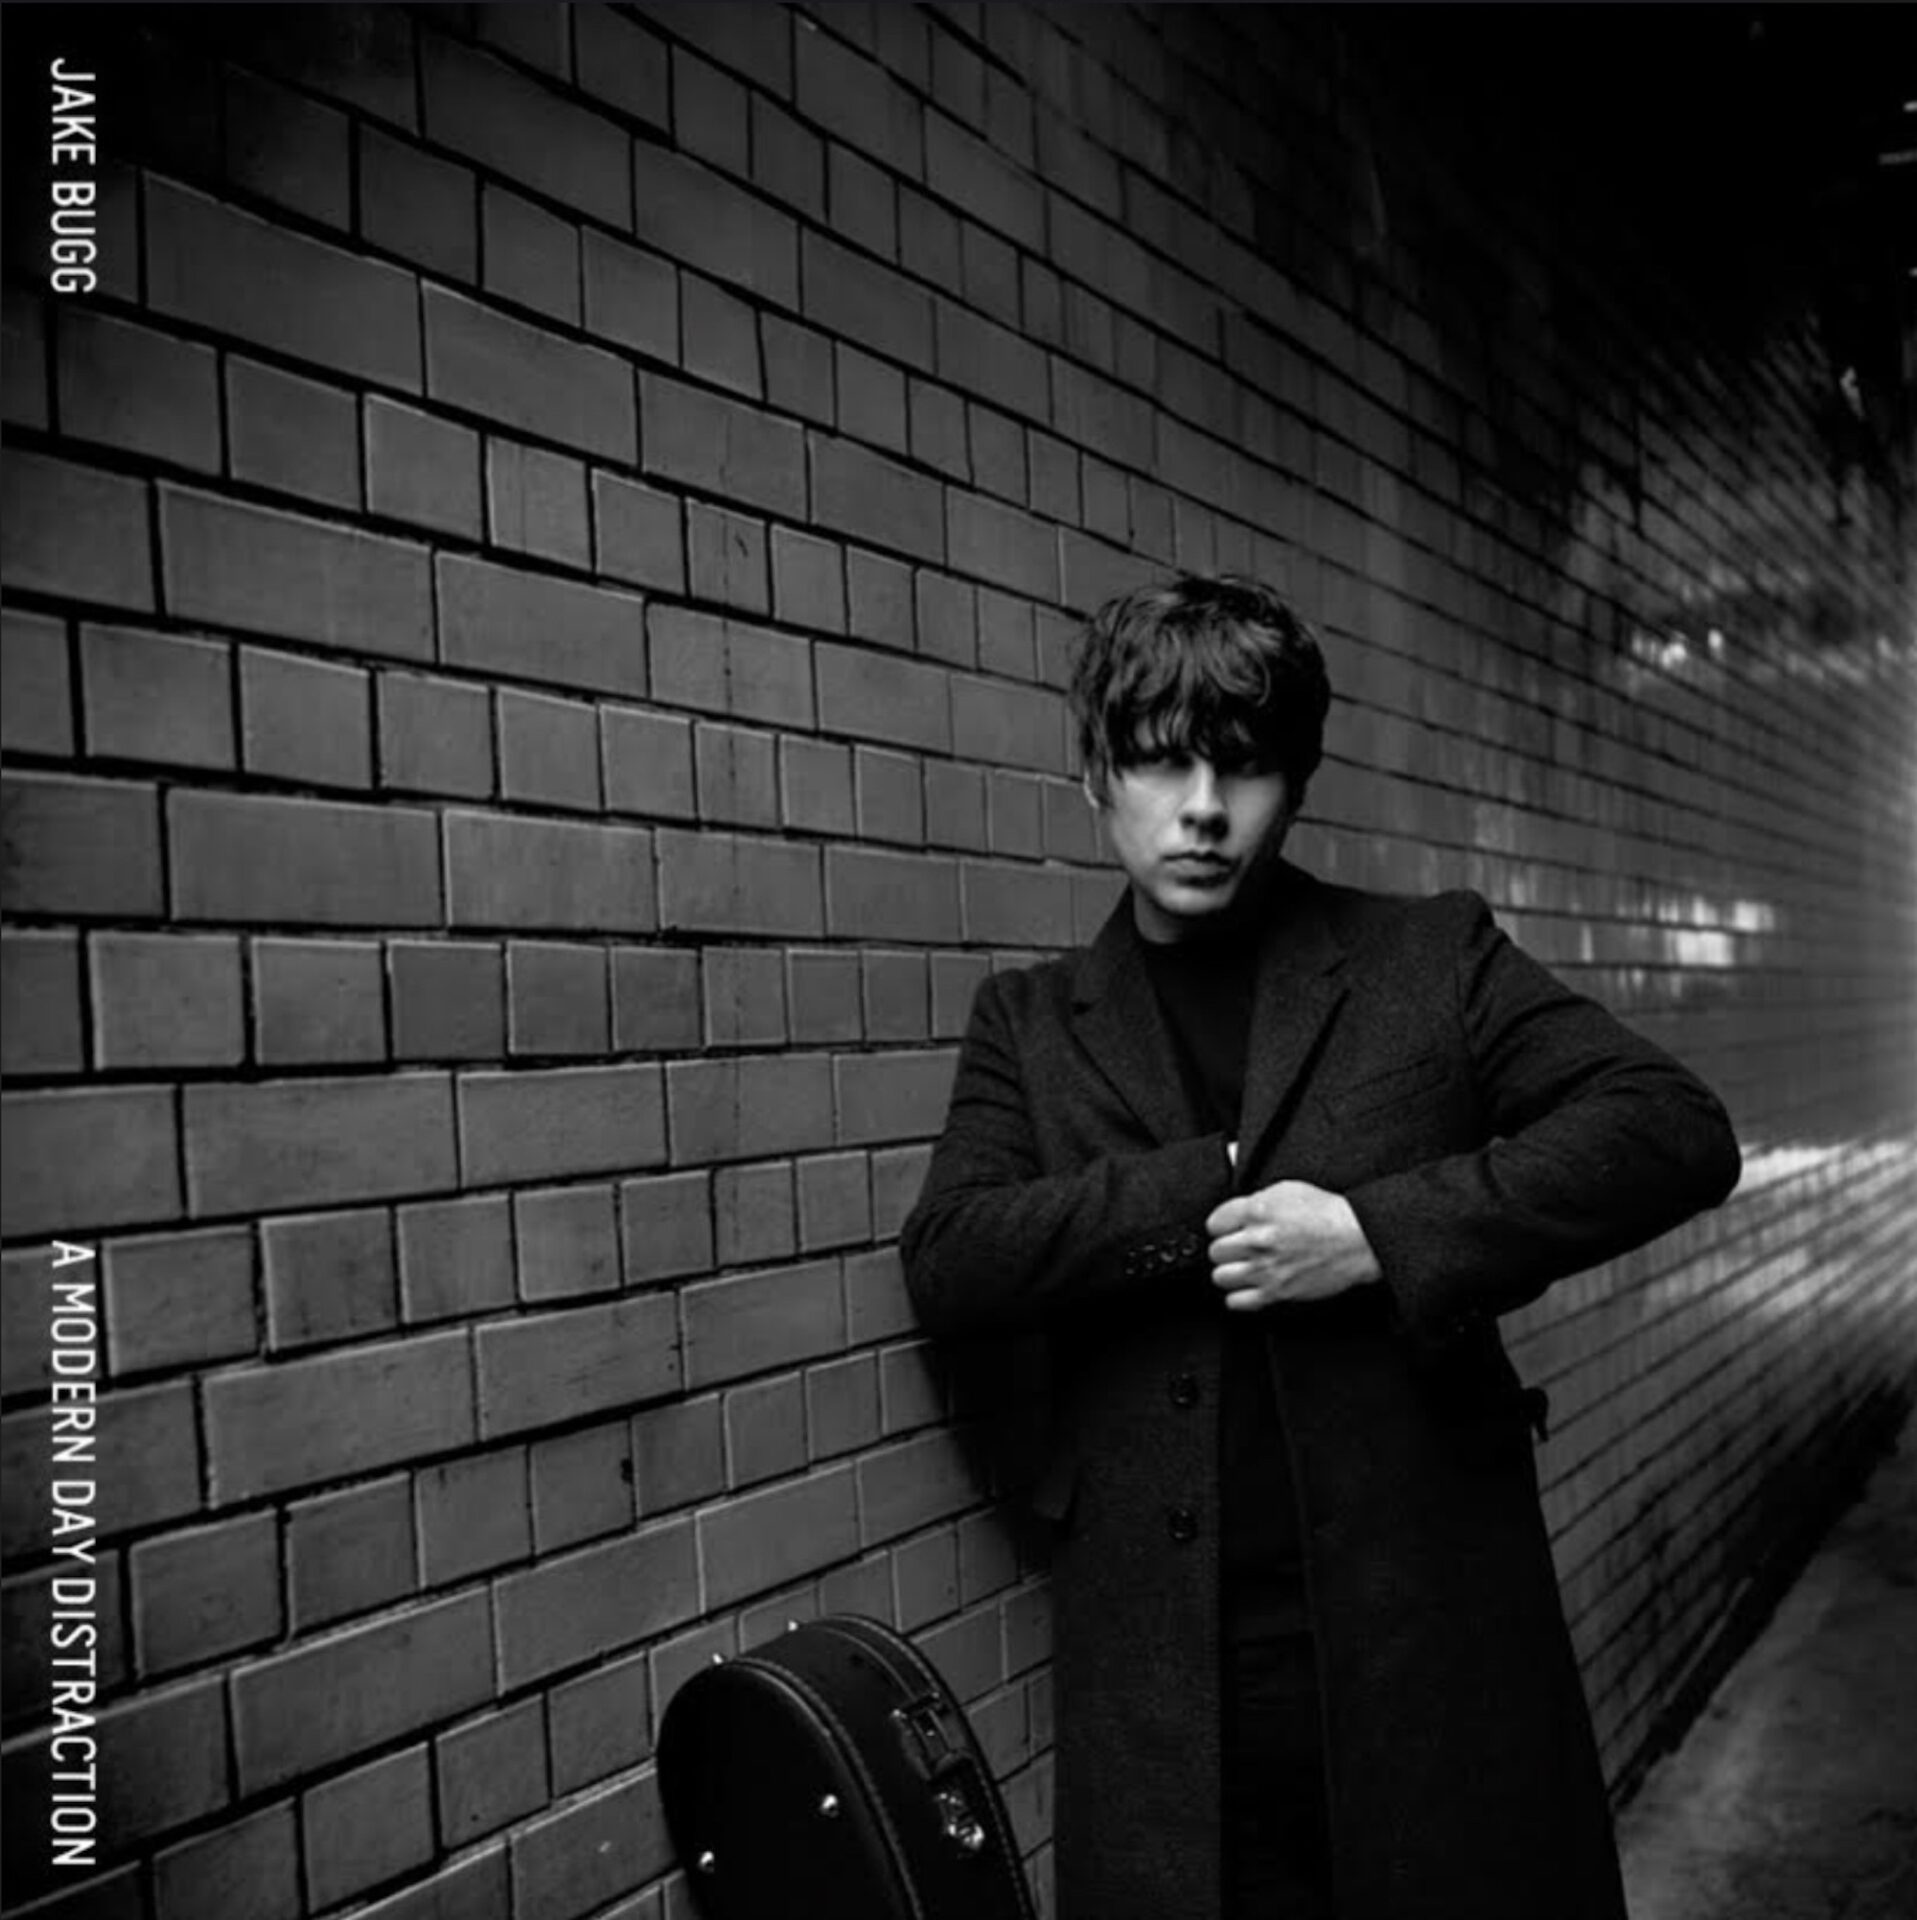 Jake Bugg announces ‘A Modern Day Distraction’ album with new single ‘Zombieland’